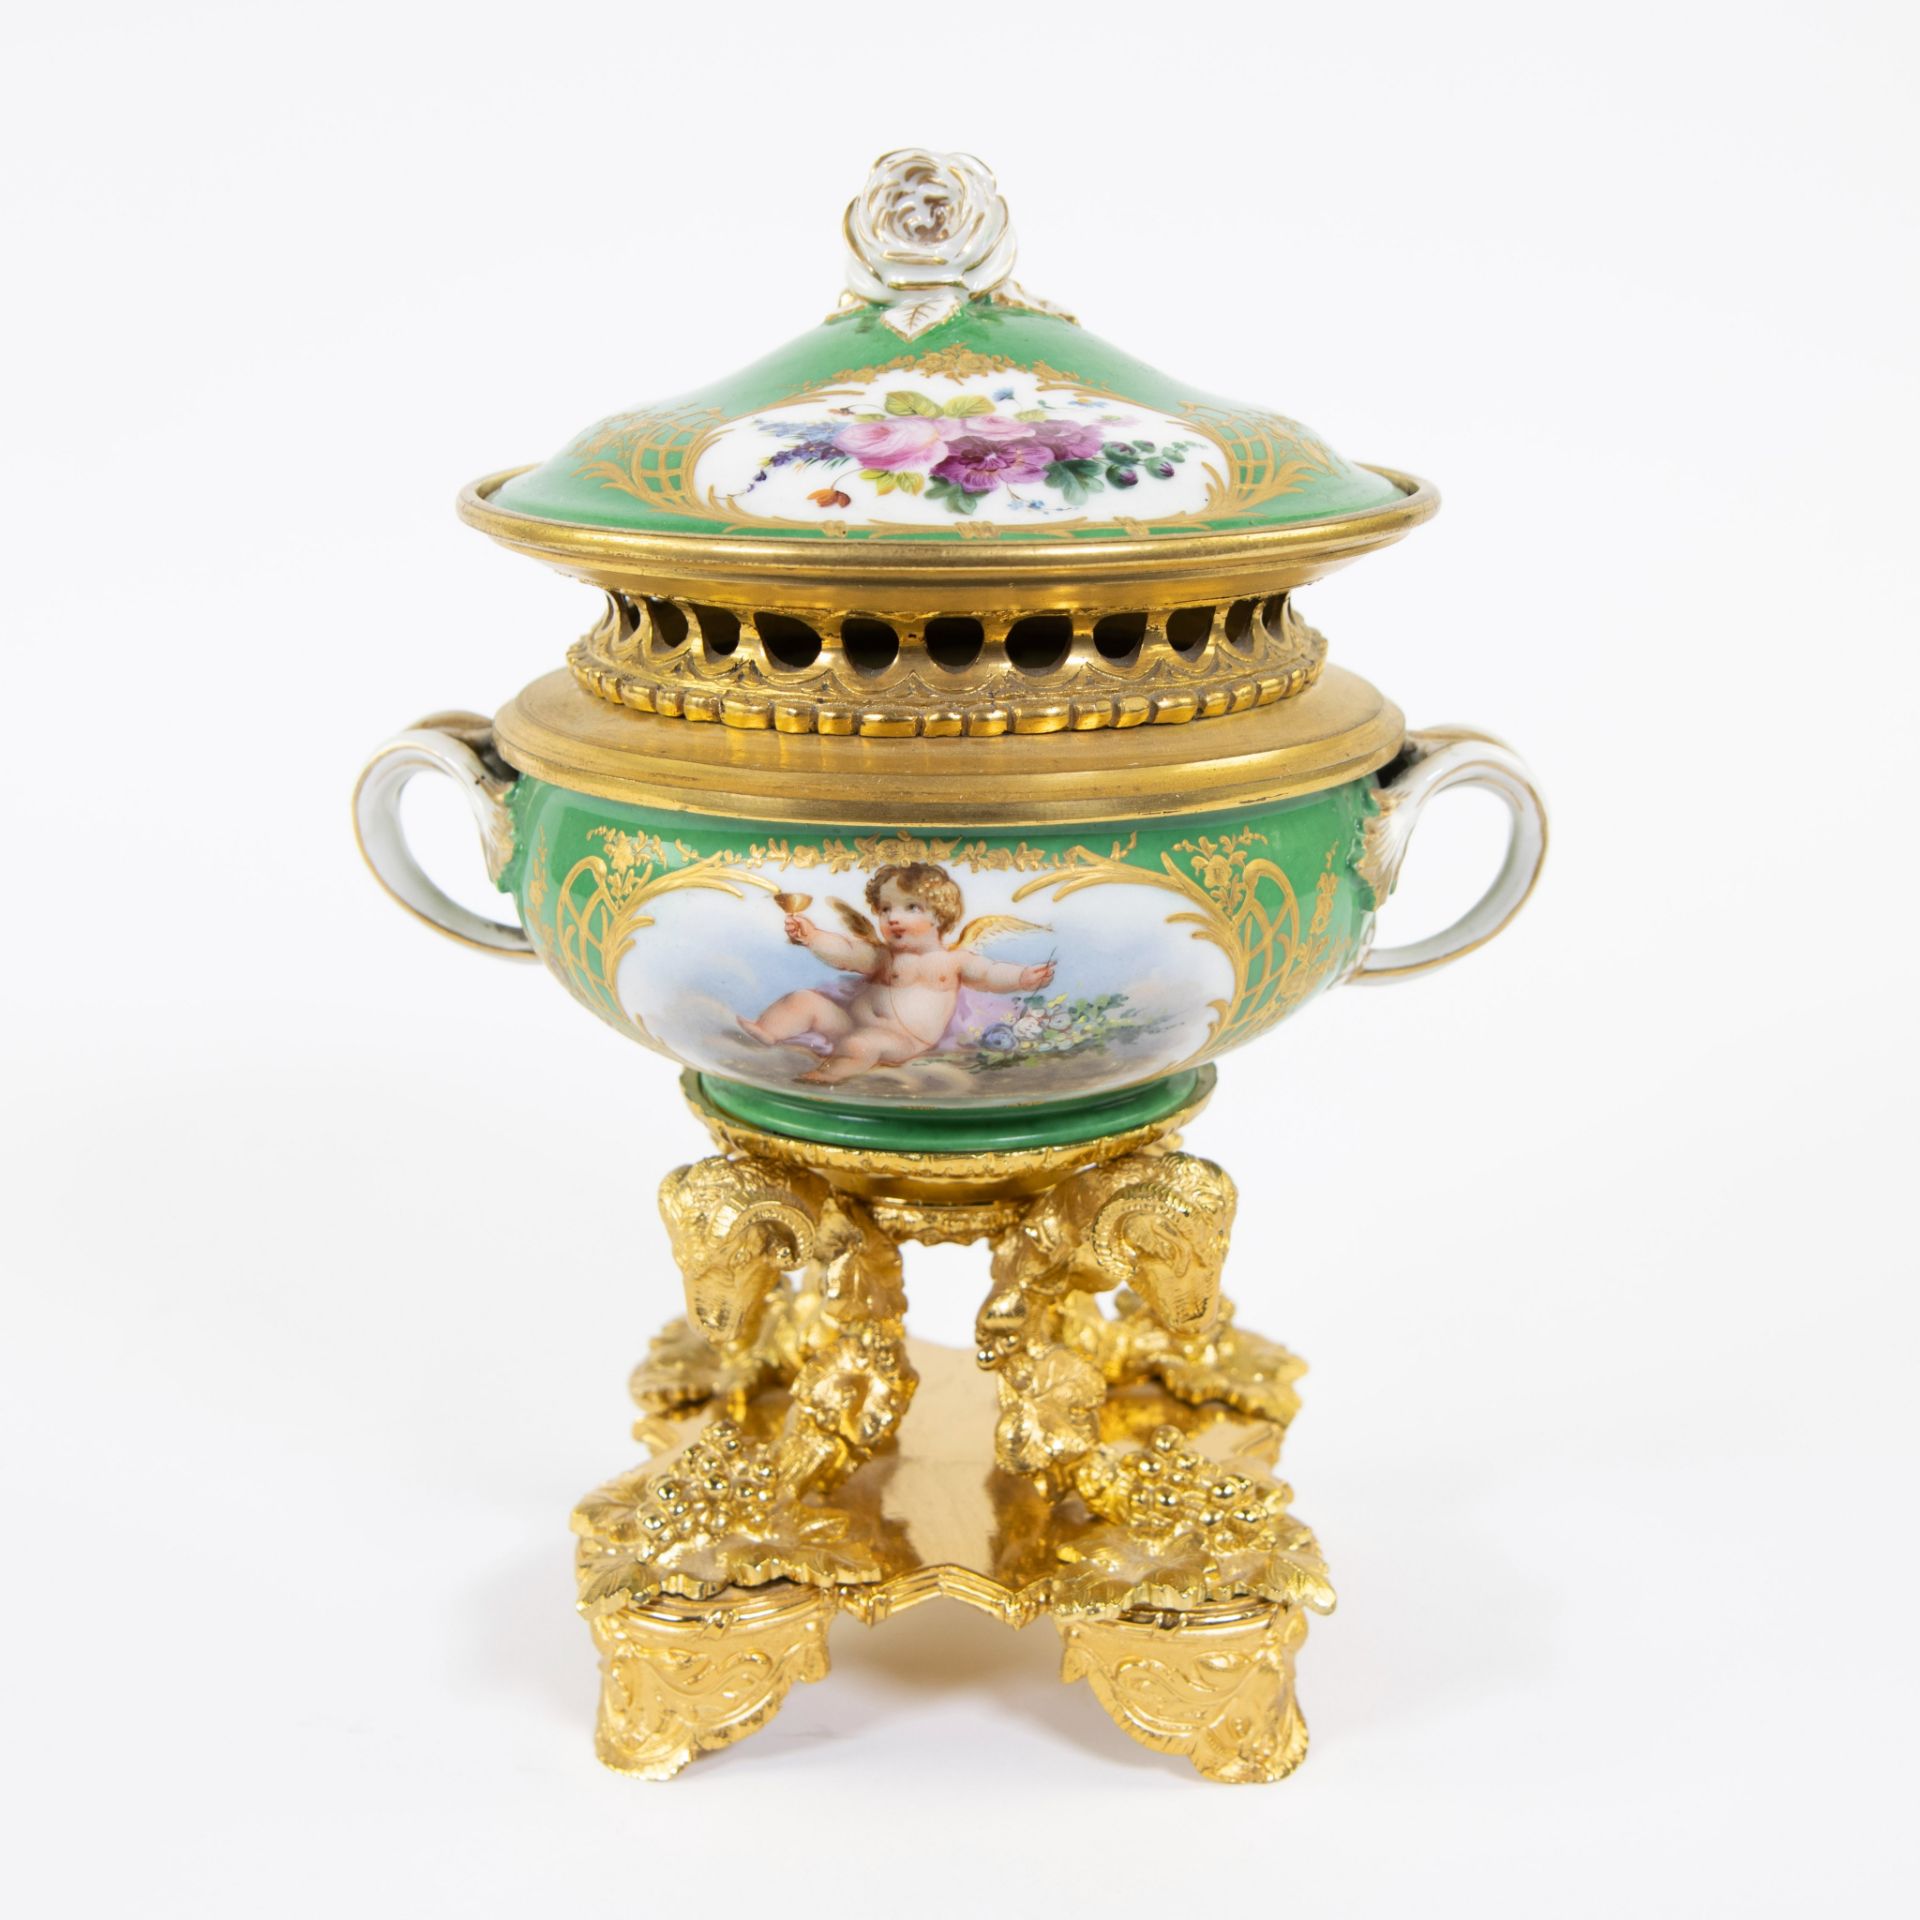 Porcelain table piece with gilt bronze fittings of rams' heads and bunches of grapes. Handpainted wi